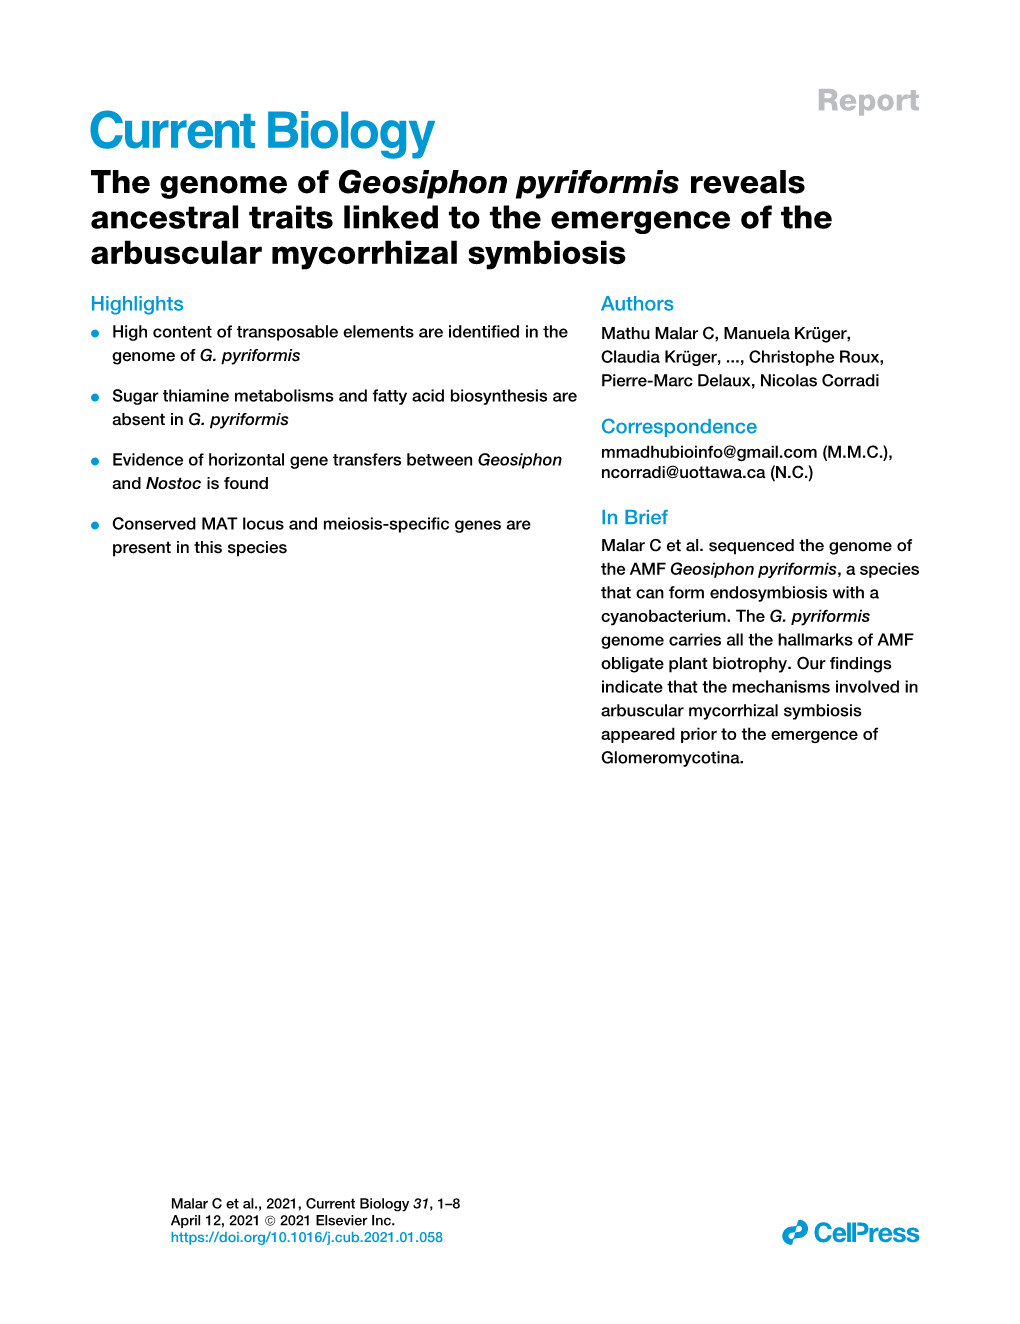 The Genome of Geosiphon Pyriformis Reveals Ancestral Traits Linked to the Emergence of the Arbuscular Mycorrhizal Symbiosis